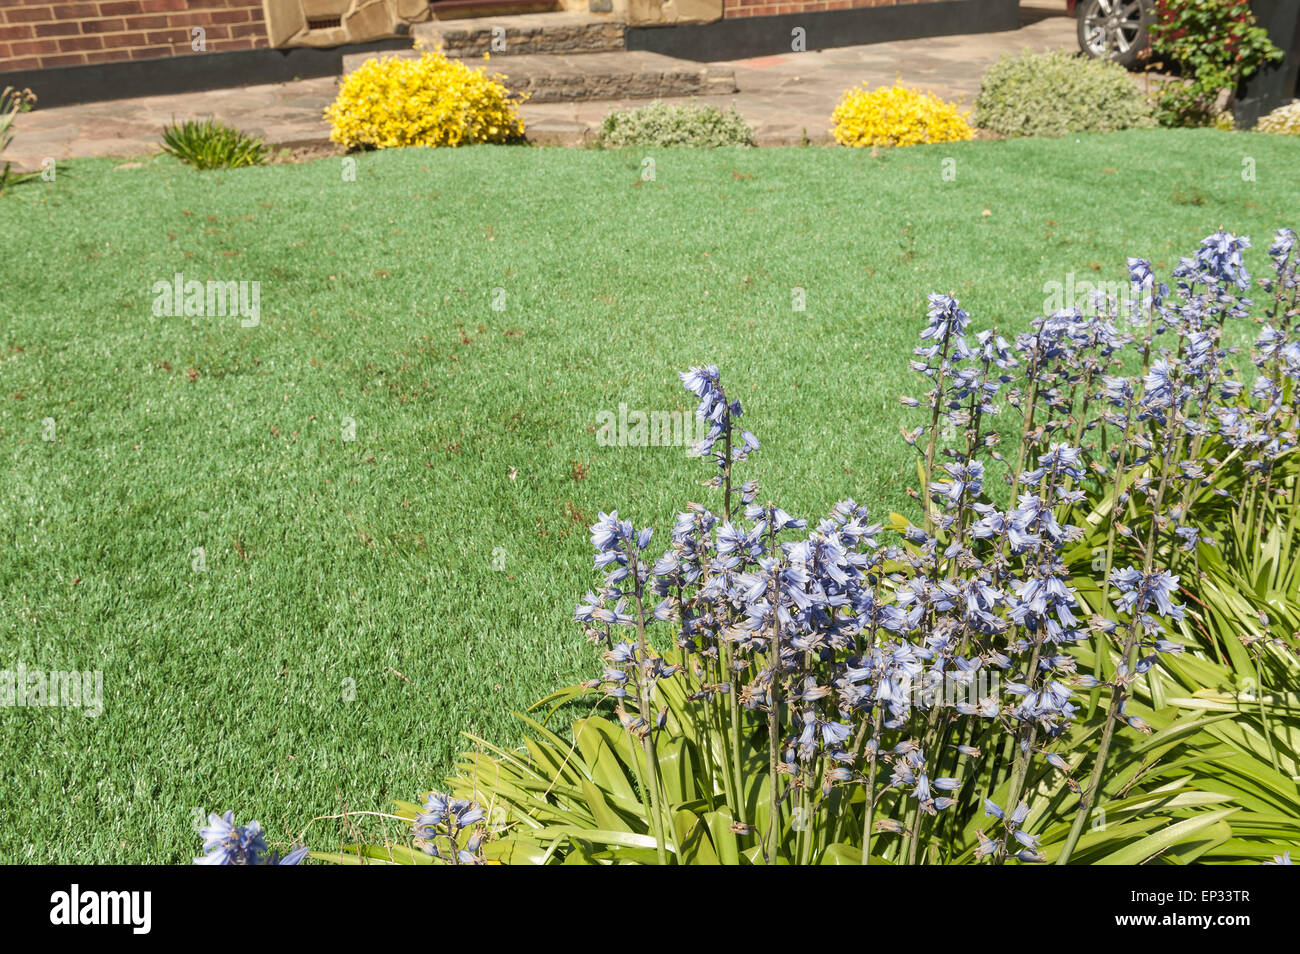 Low maintenance blending in a plastic grass lawn beside patio and flower border no mowing or cutting the lawn quite realistic Stock Photo